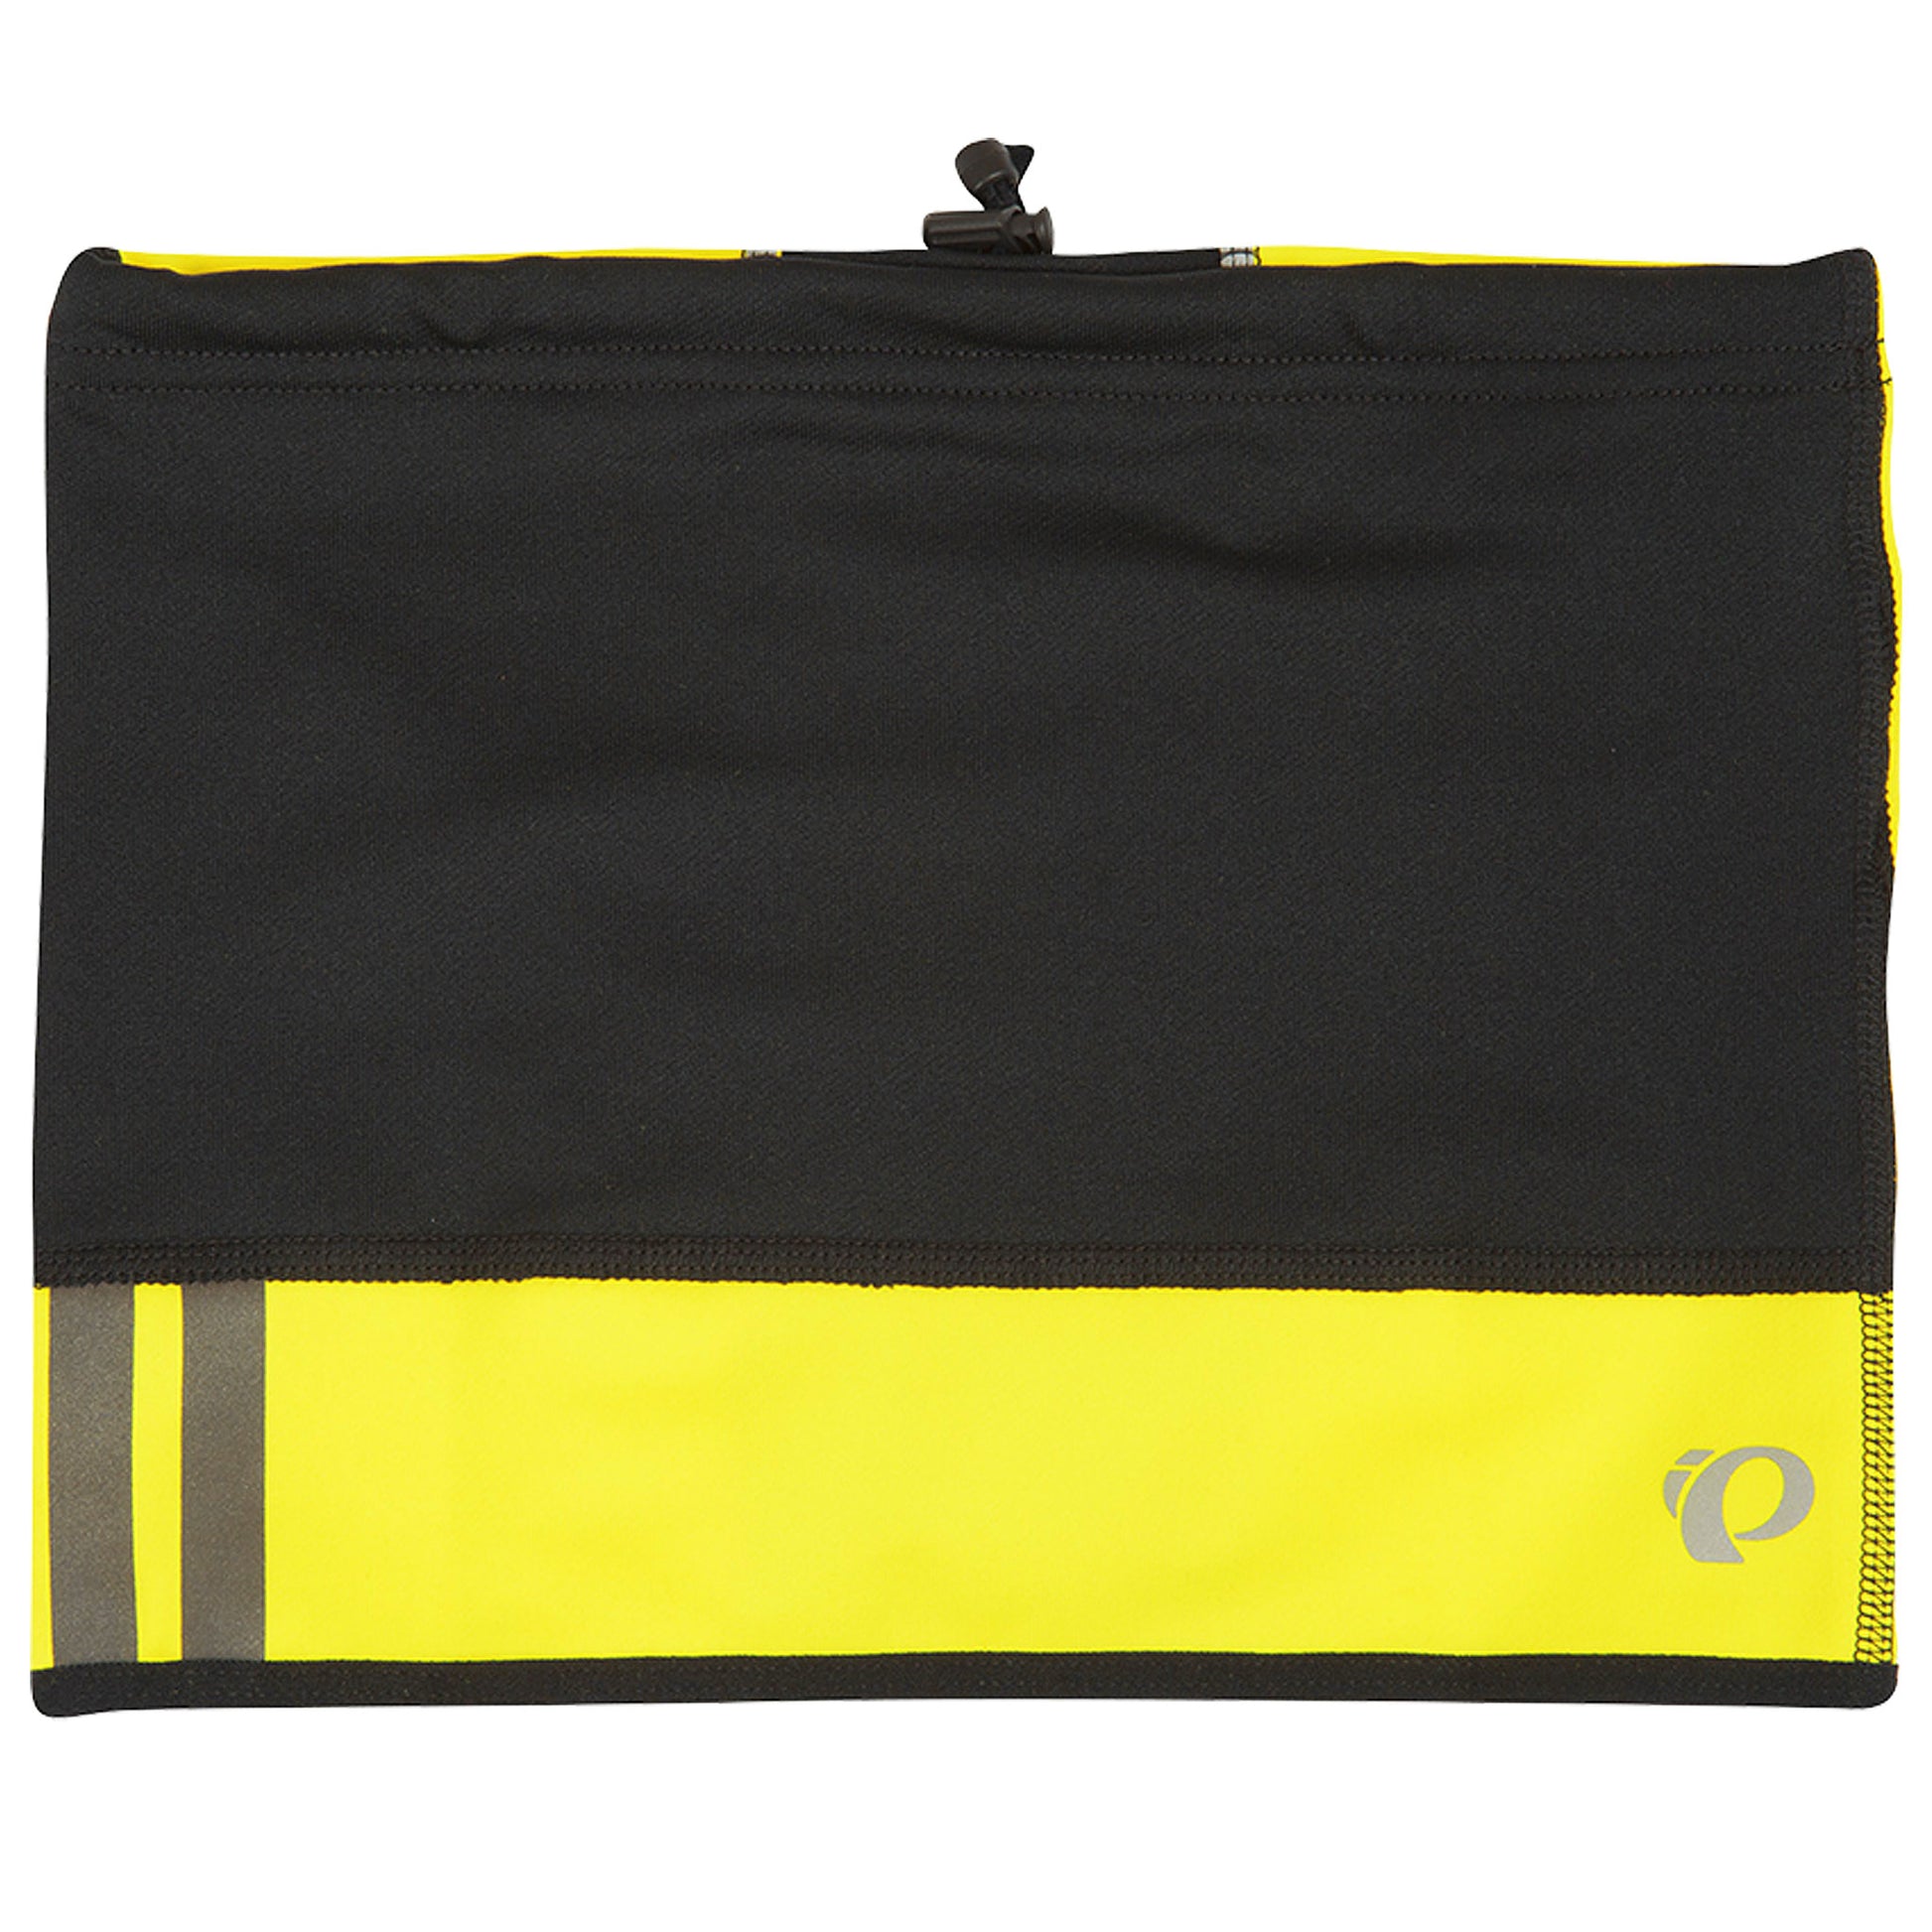 Pearl Izumi Thermal Neck Gaiter, Screaming Yellow, One Size Fits All